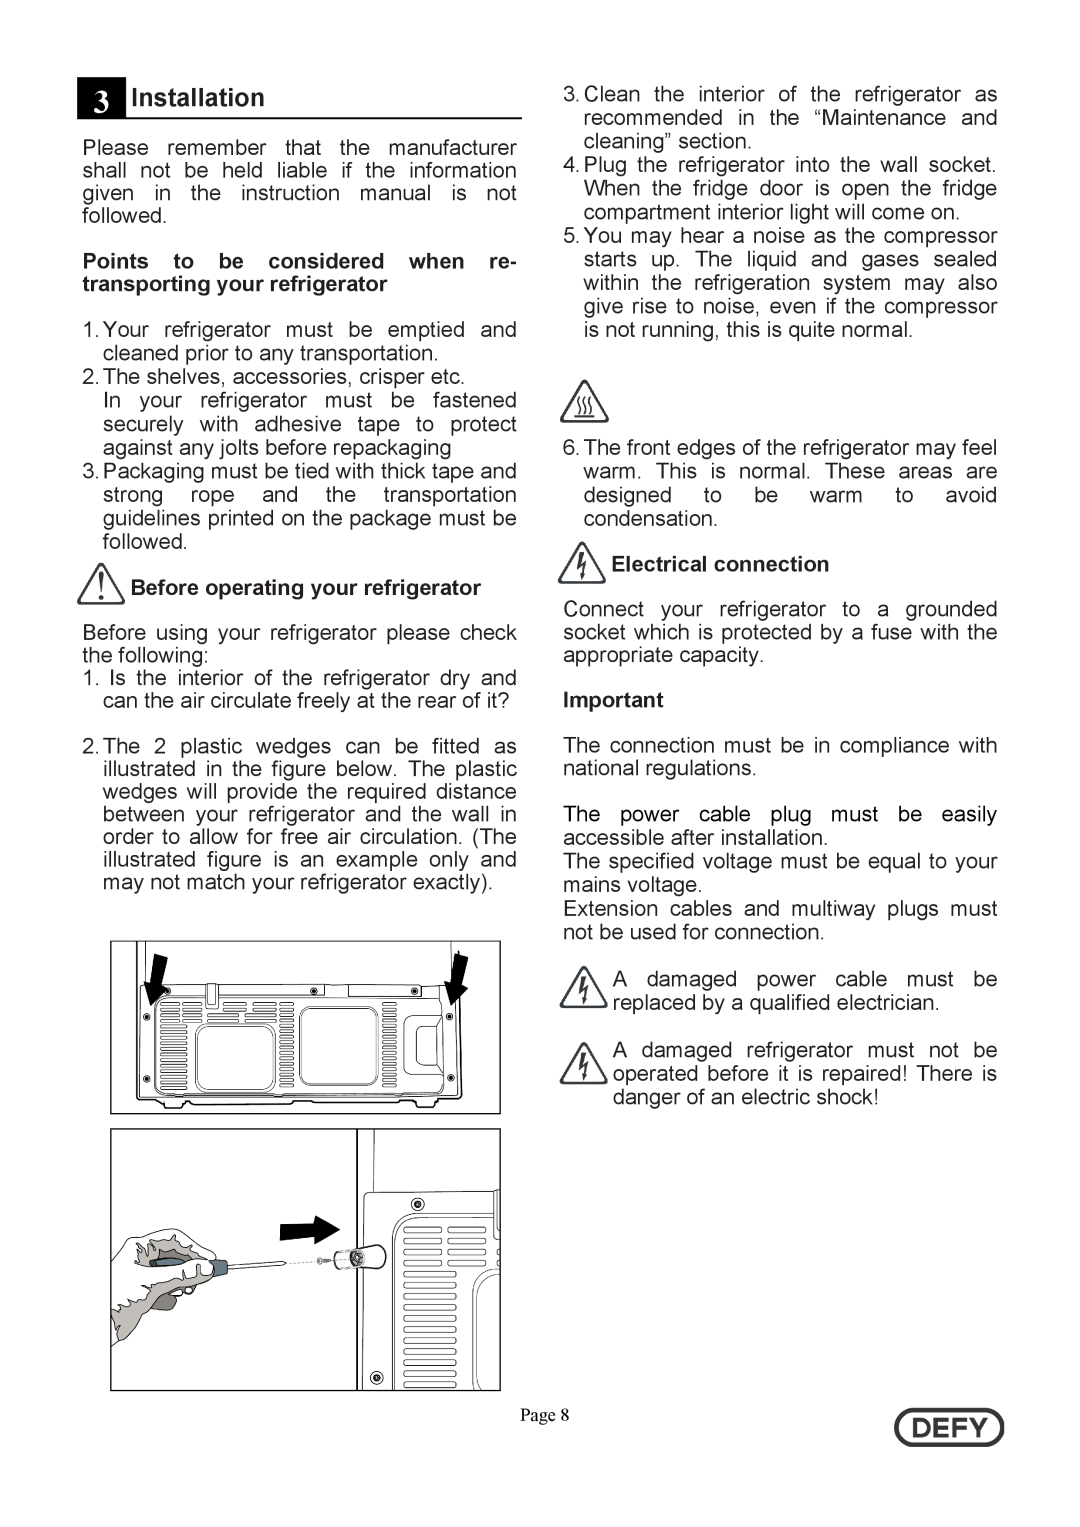 Defy Appliances DFC402 instruction manual Installation, Points to be considered when re- transporting your refrigerator 